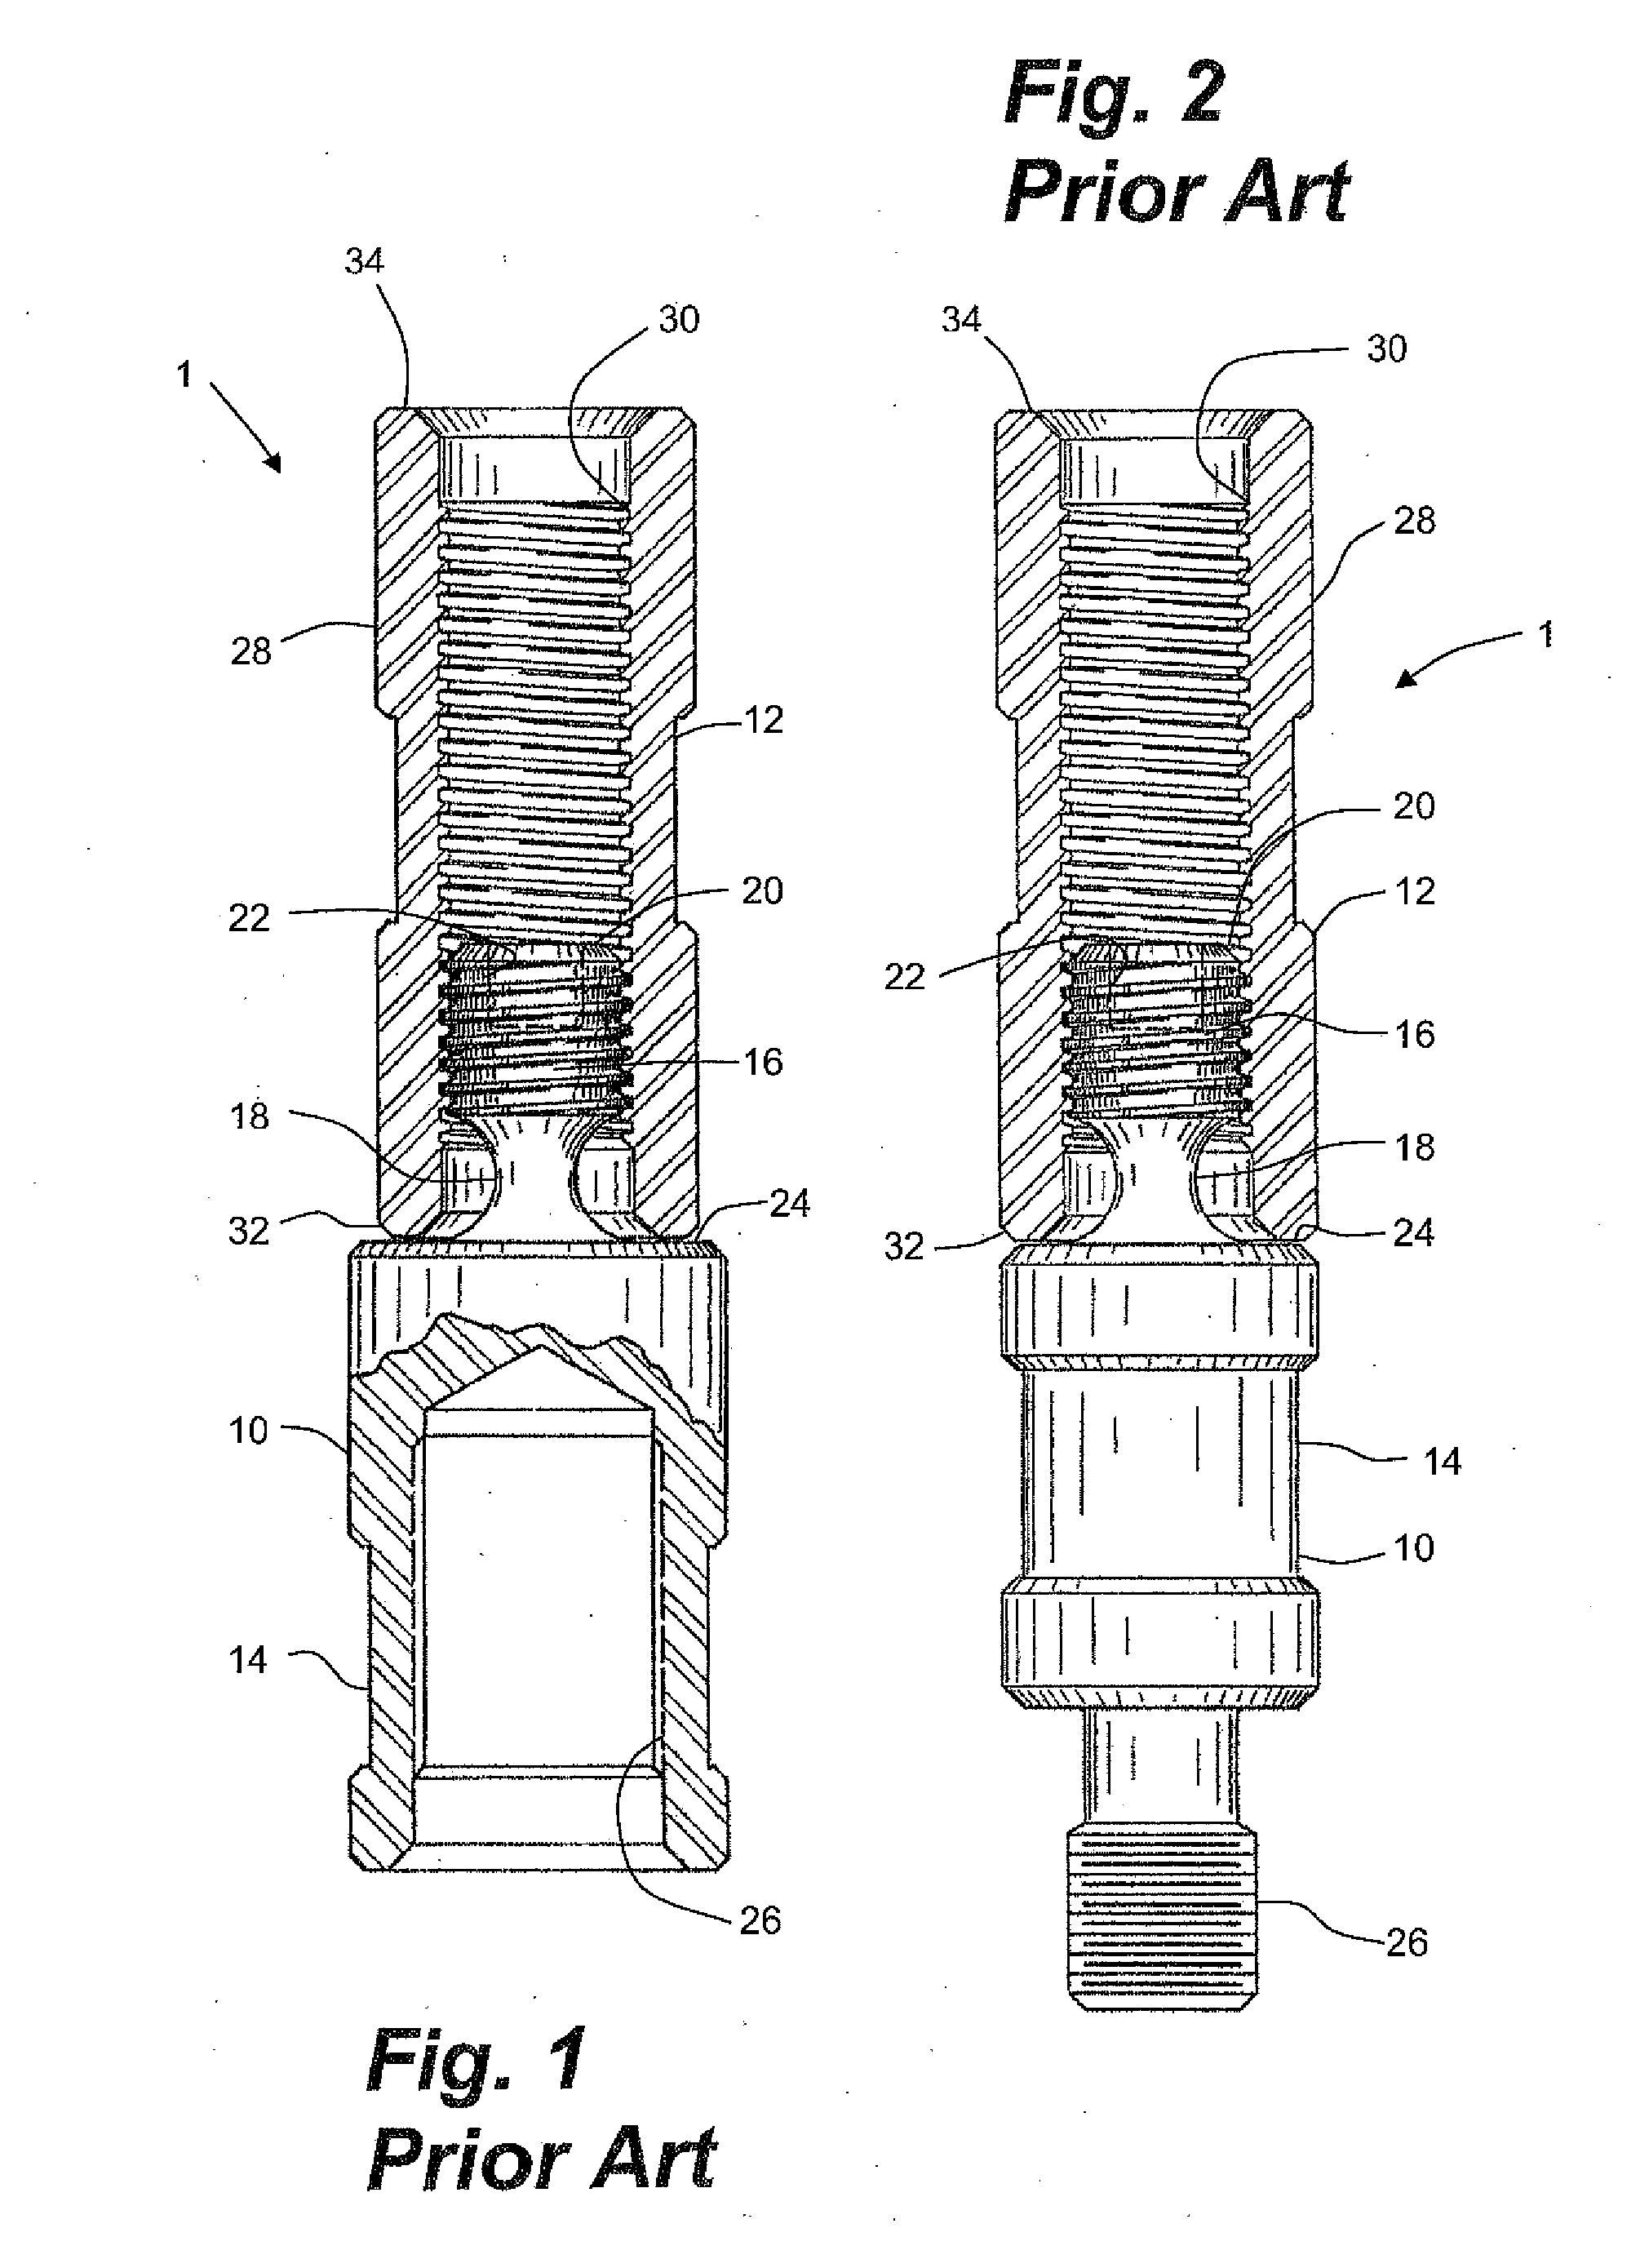 Shear coupling assembly for use with rotary and reciprocating pumps